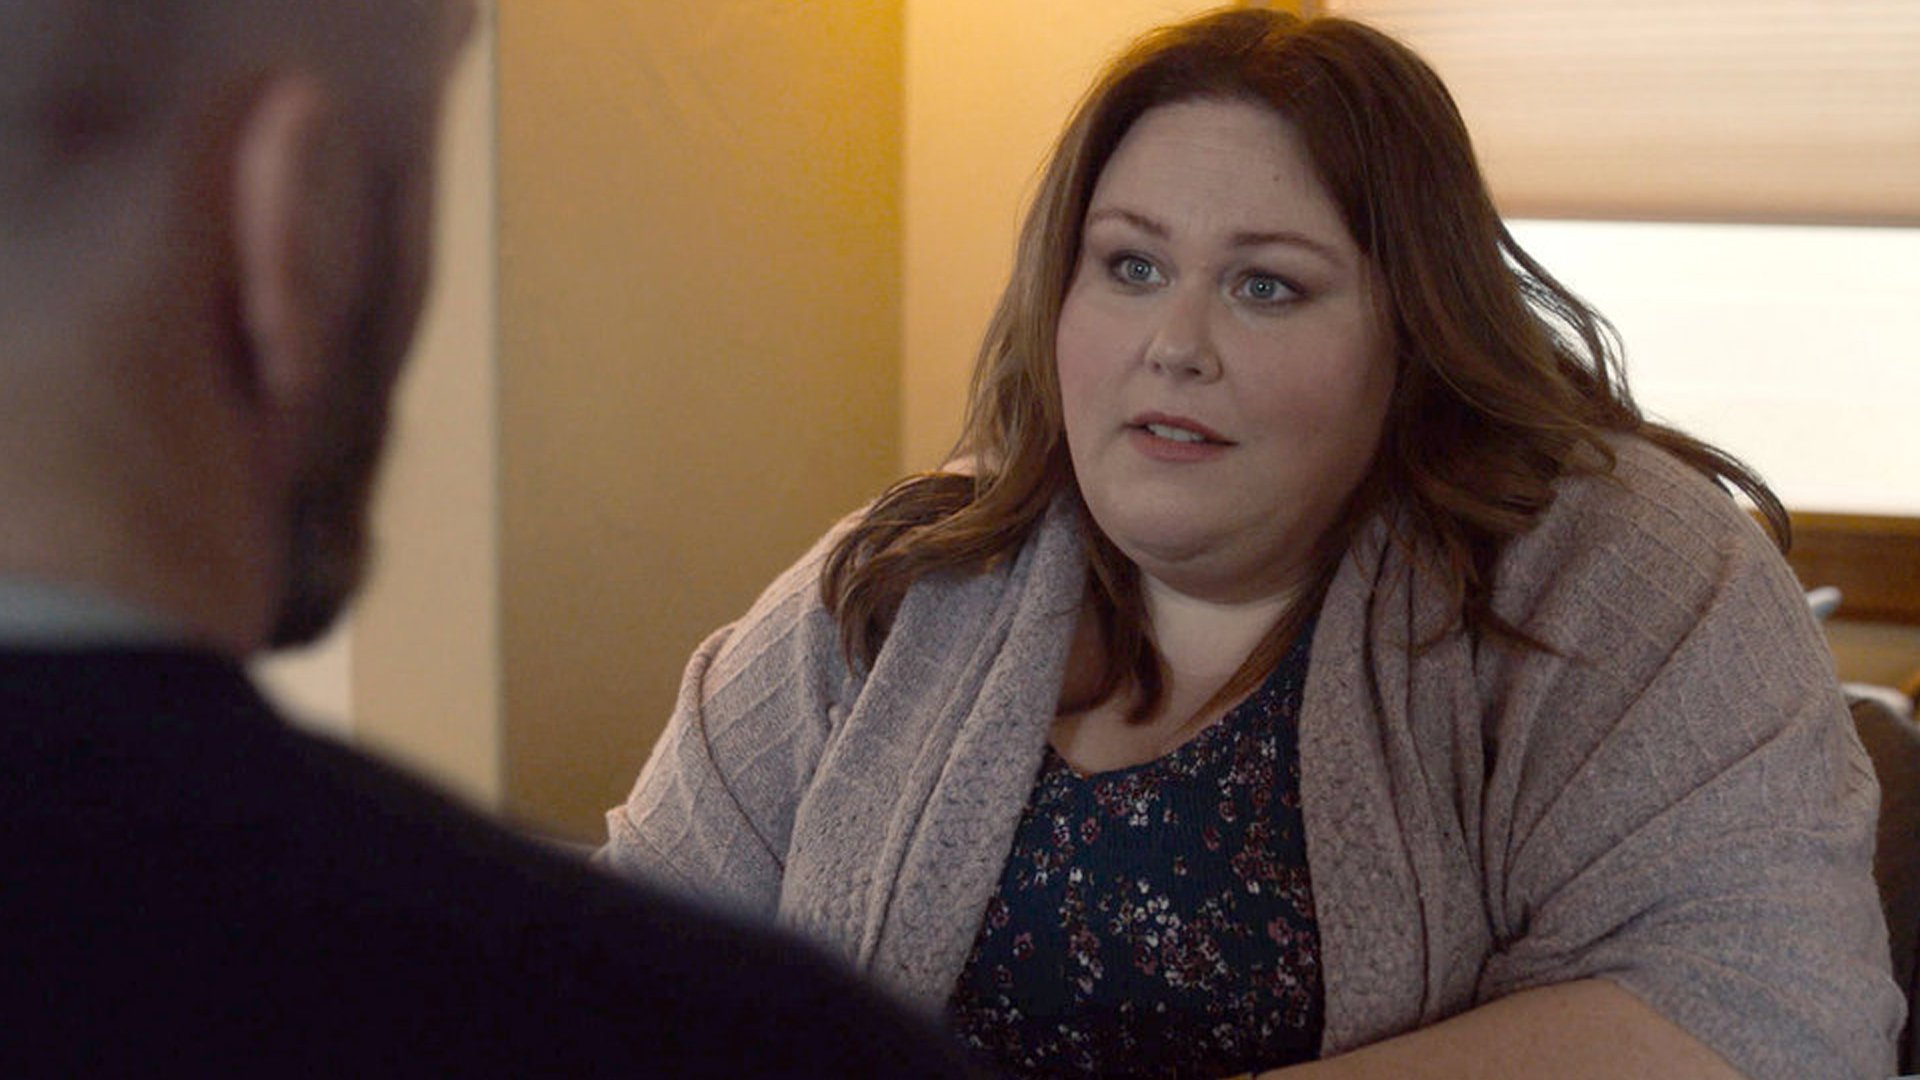 Chrissy Metz as Kate looking at Chris Sullivan as Toby on ‘This Is Us’ Season 5 Episode 9, “The Ride.”